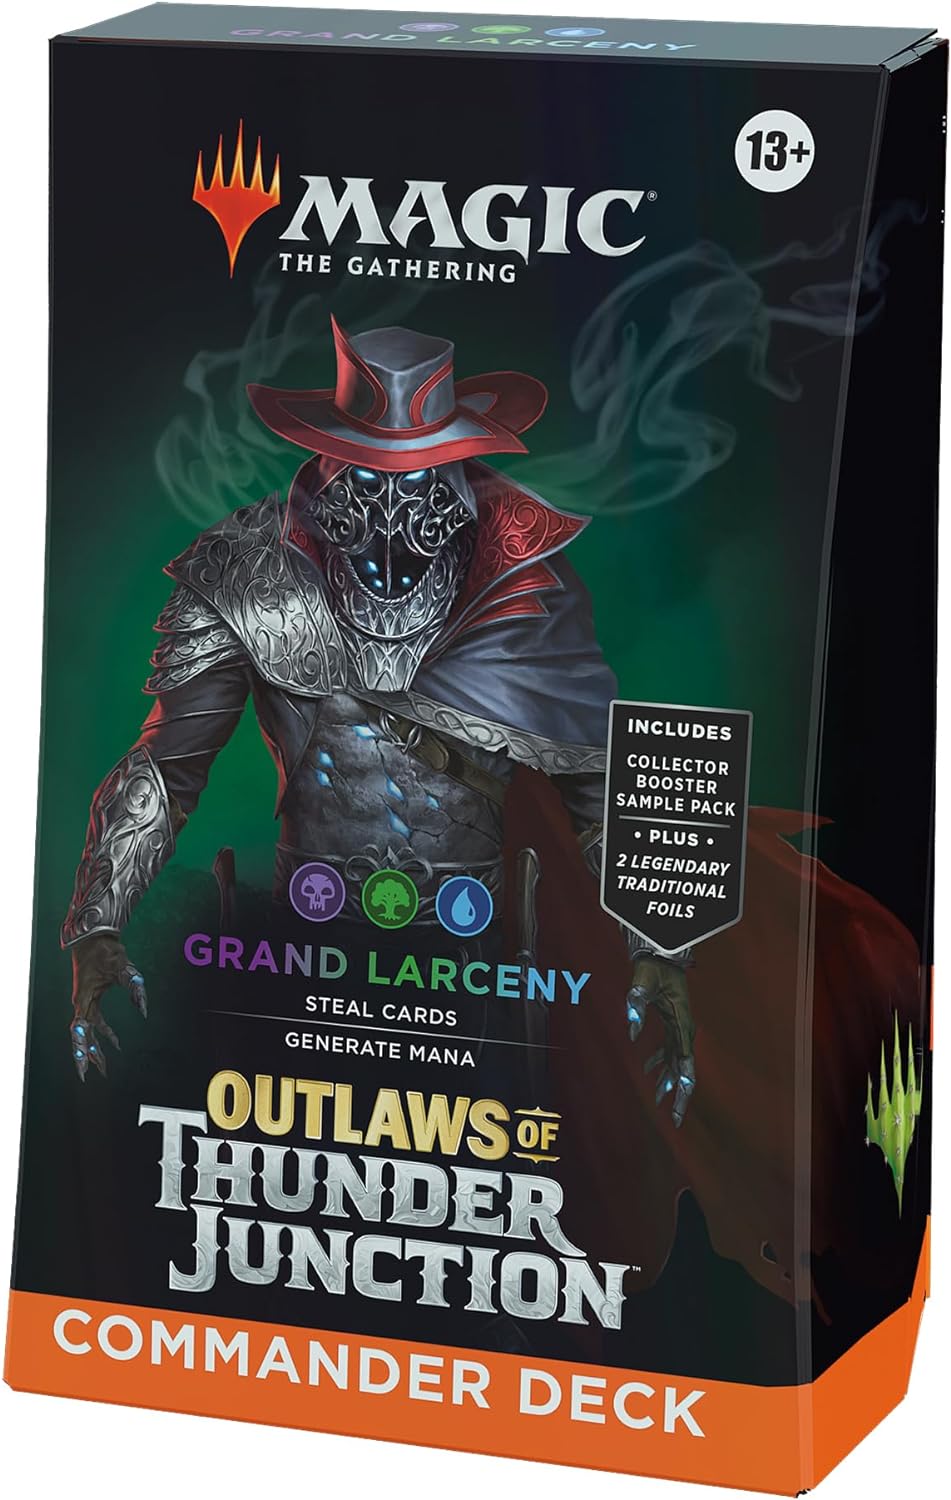 Magic: The Gathering Outlaws of Thunder Junction Commander Deck - Grand Larceny - gabescaveccc